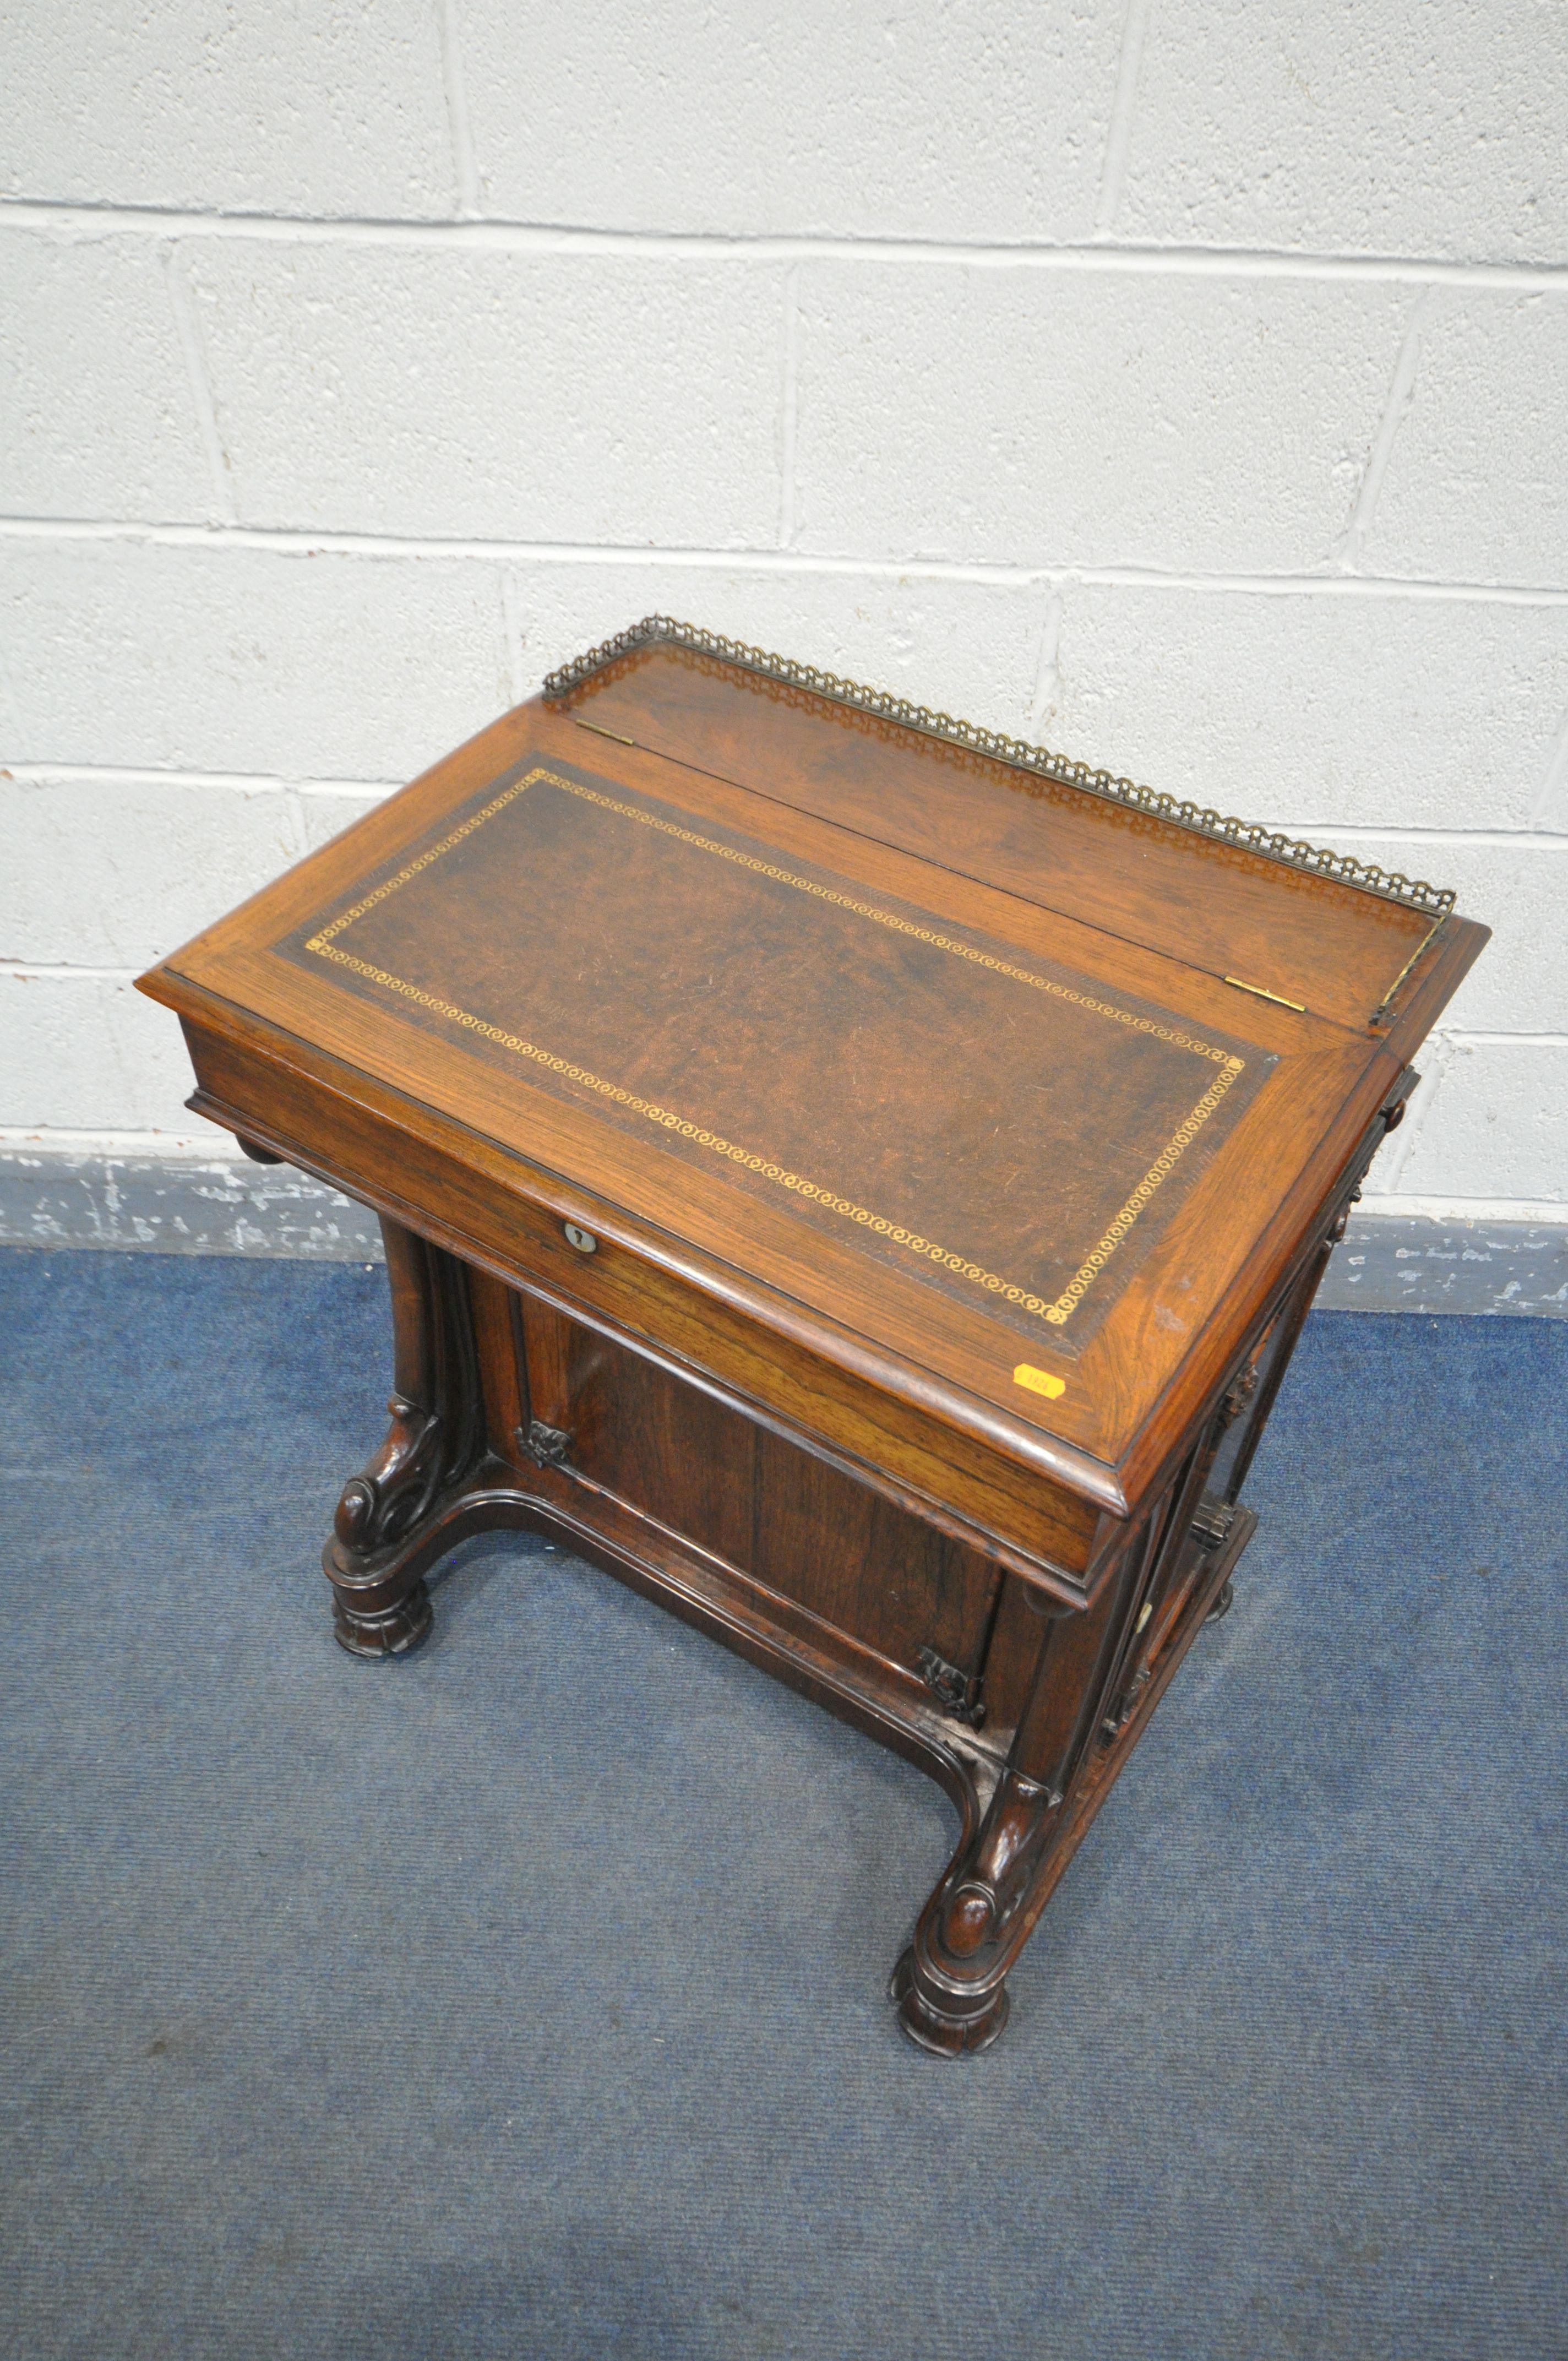 AN EARLY 19TH CENTURY ROSEWOOD DAVENPORT DESK, having a brass open fretwork gallery behind a leather - Image 2 of 9